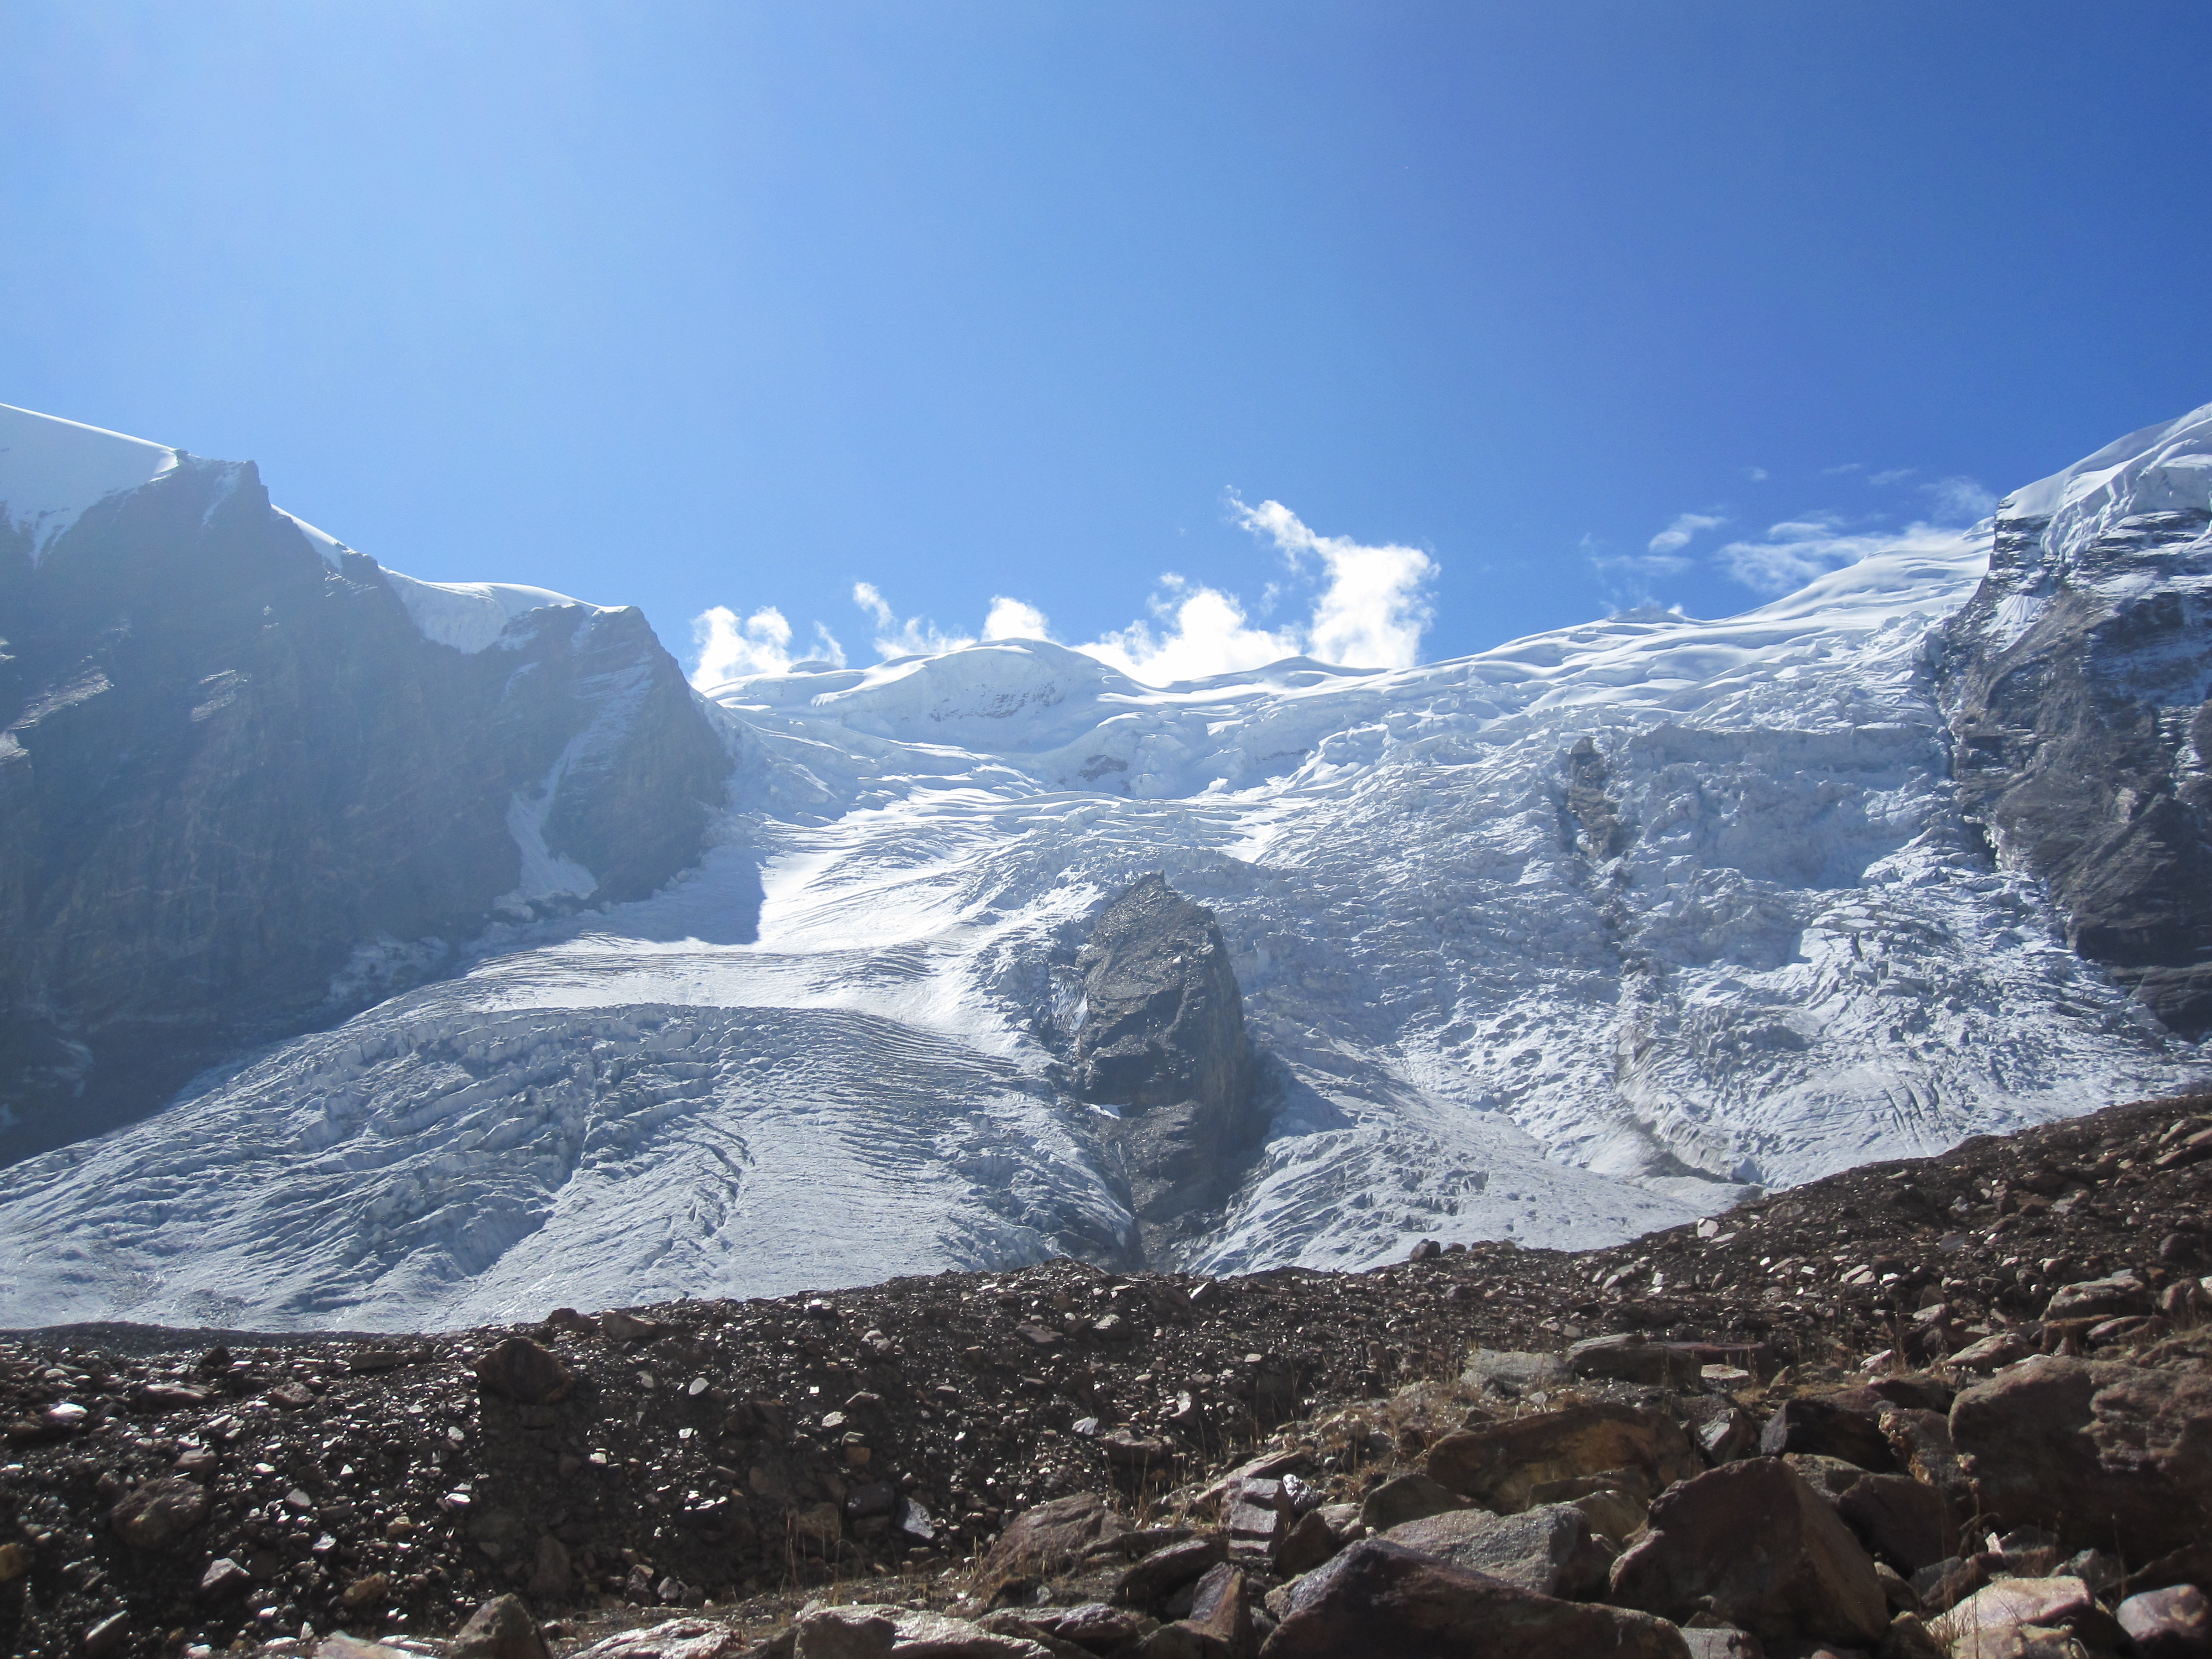 One last look at the Solong Glacier.